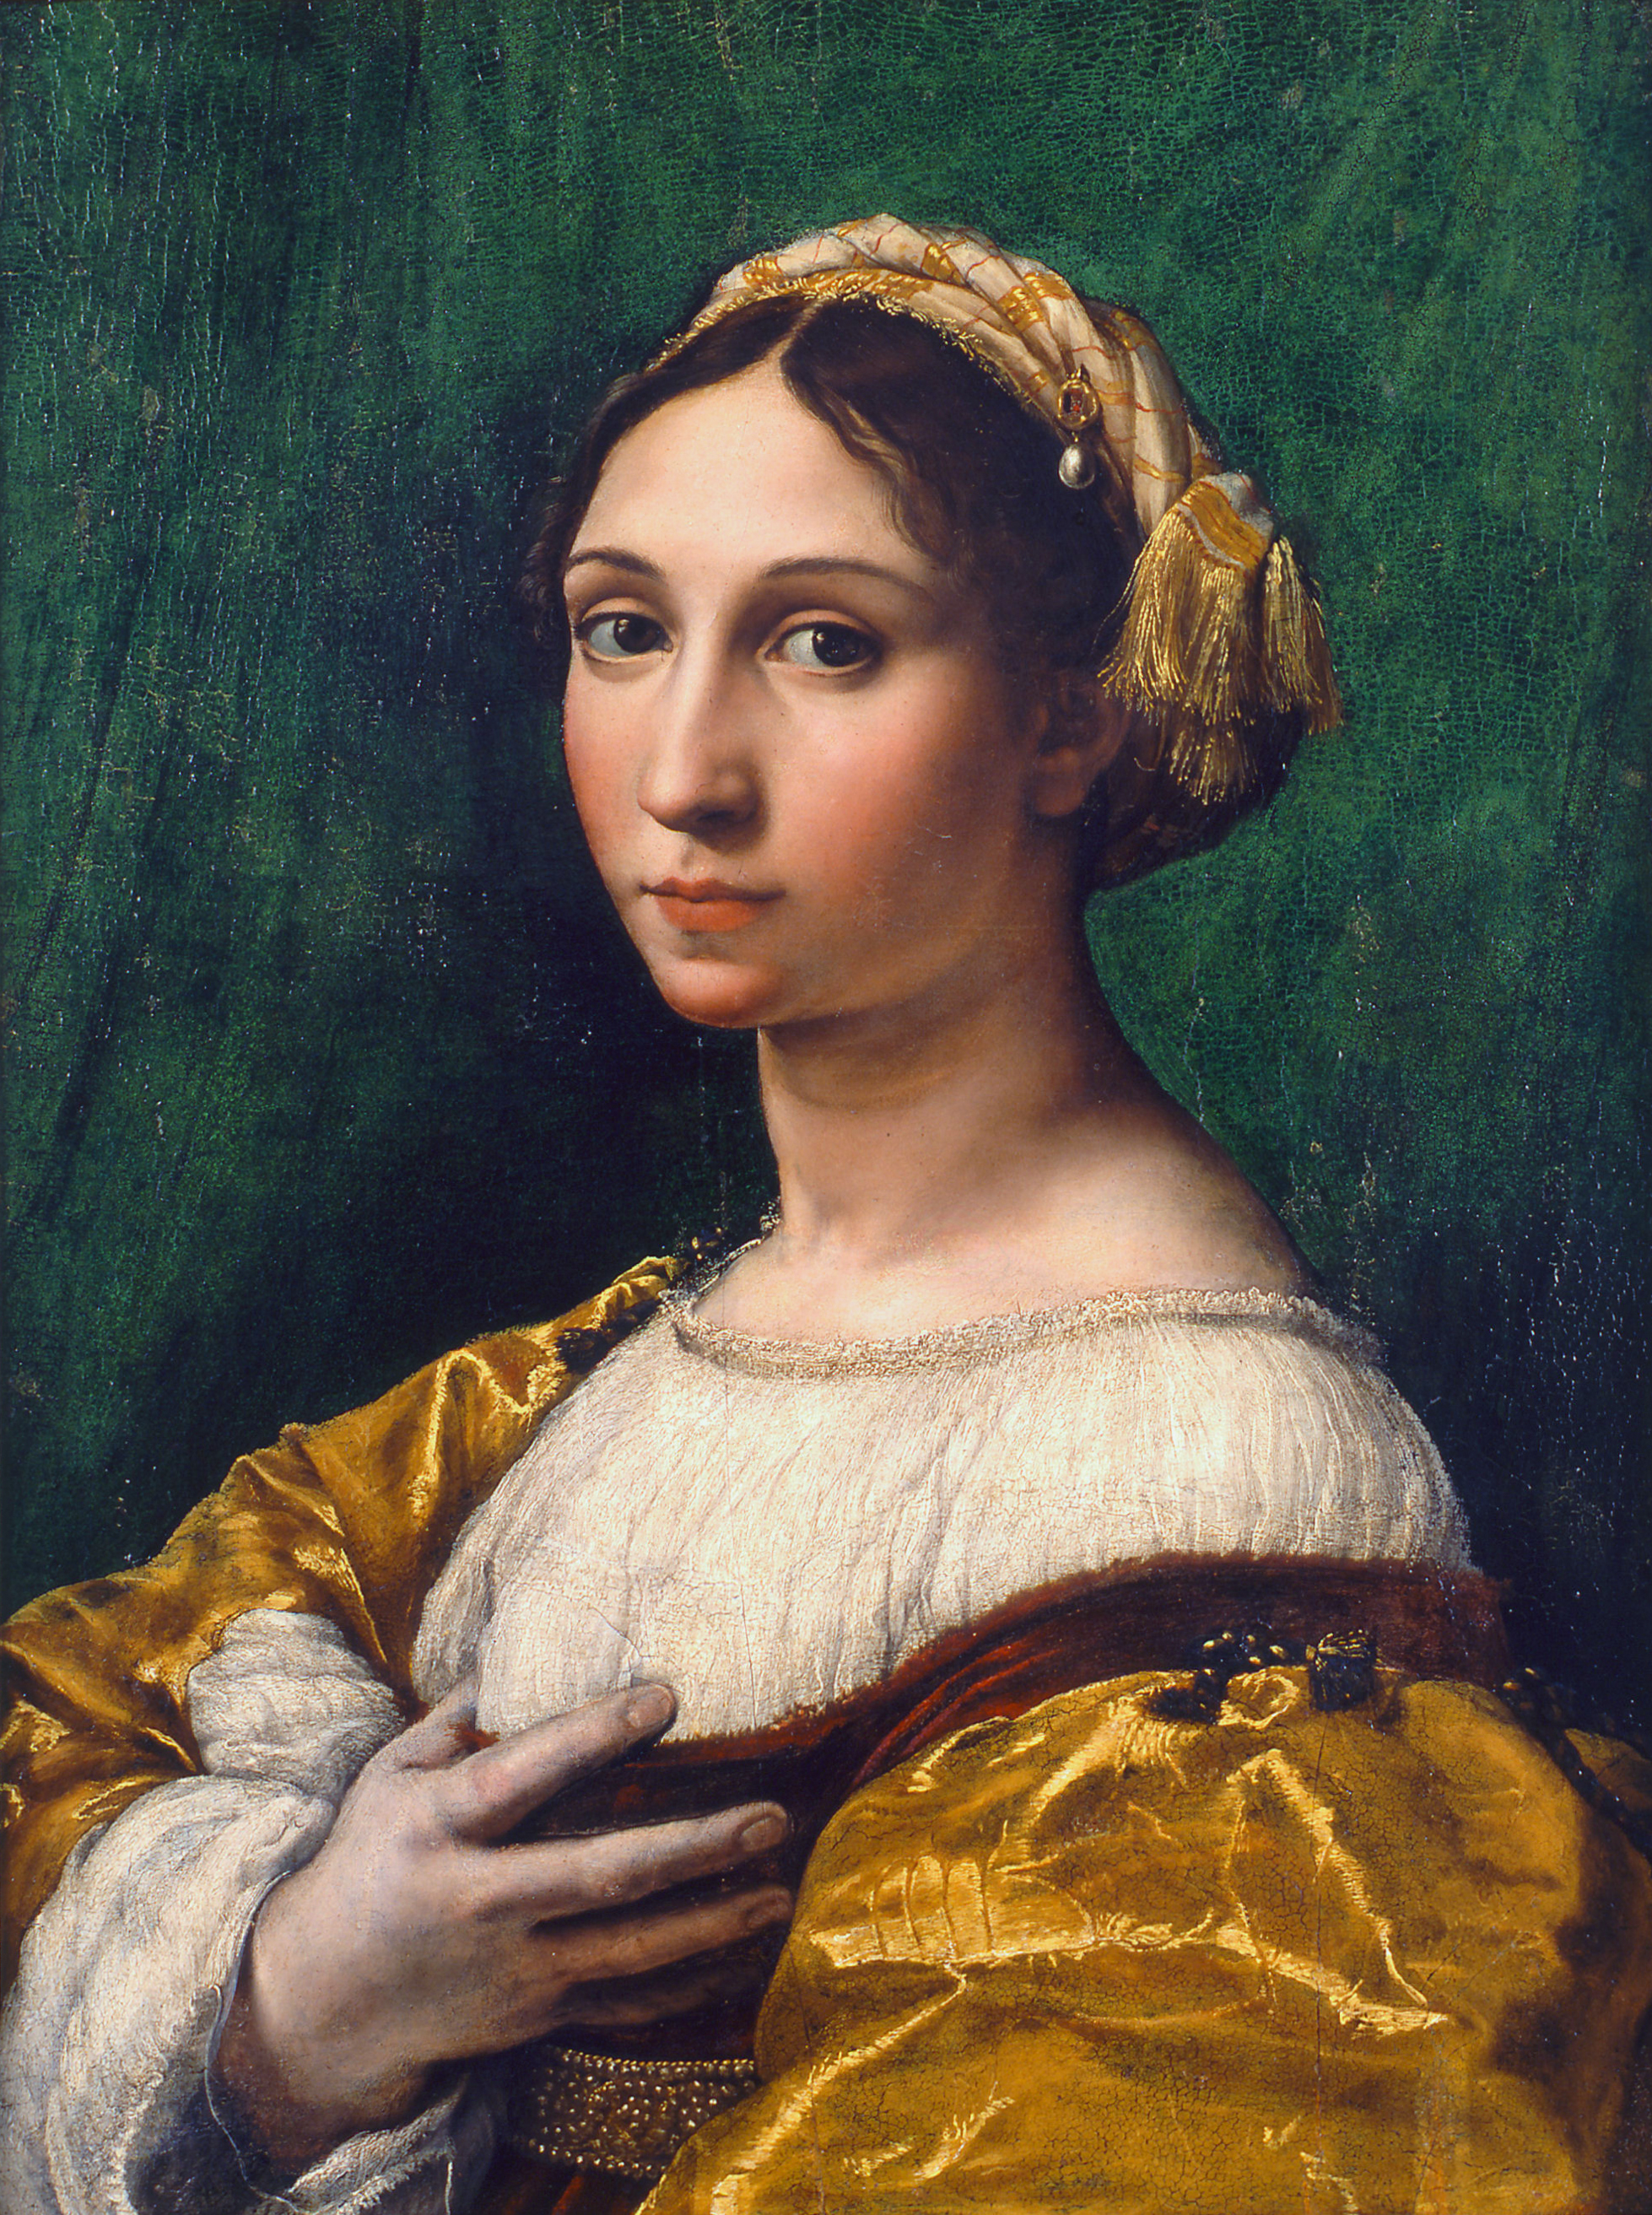 File:Portrait-of-a-Young-Girl-Raphael.jpg - Wikimedia Commons